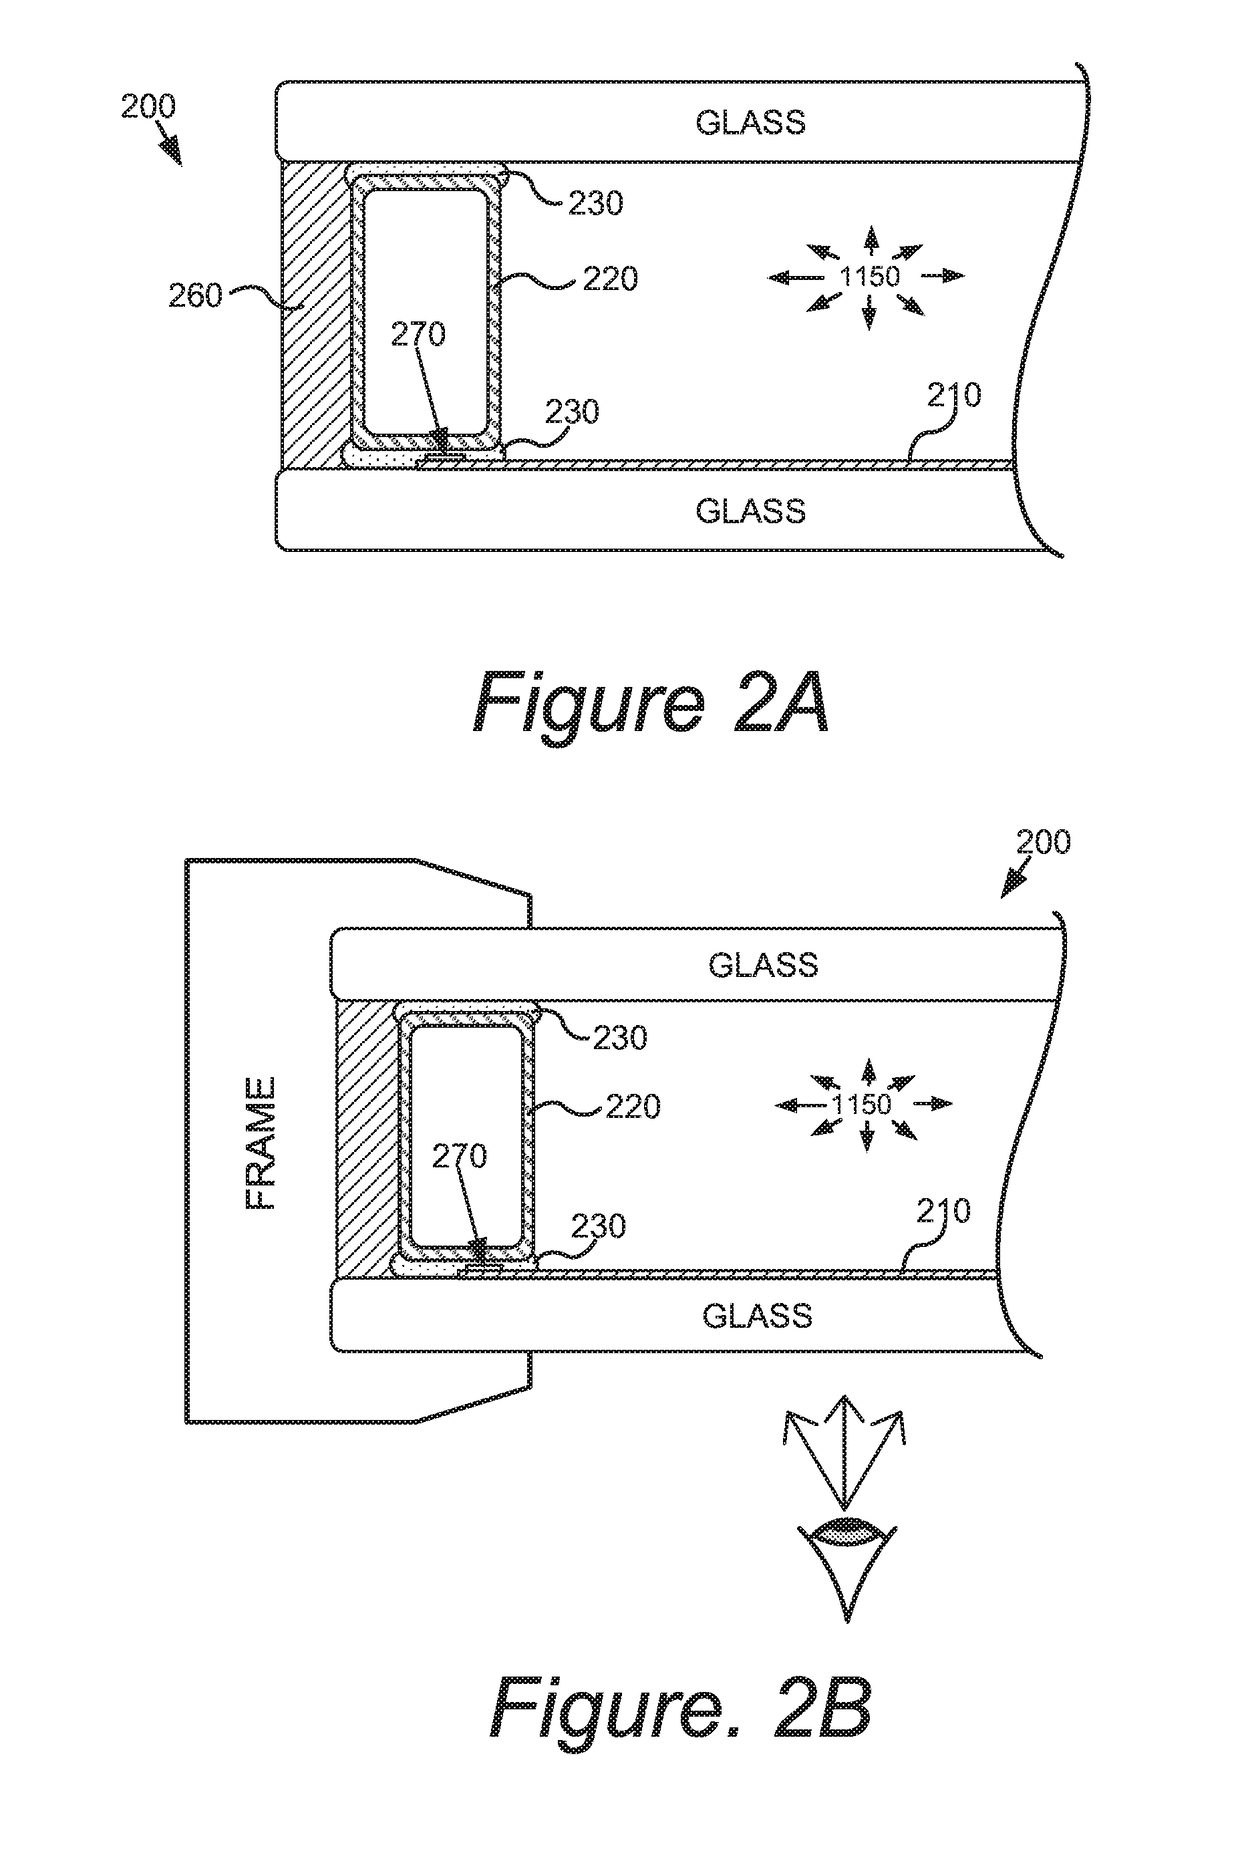 Obscuring bus bars in electrochromic glass structures